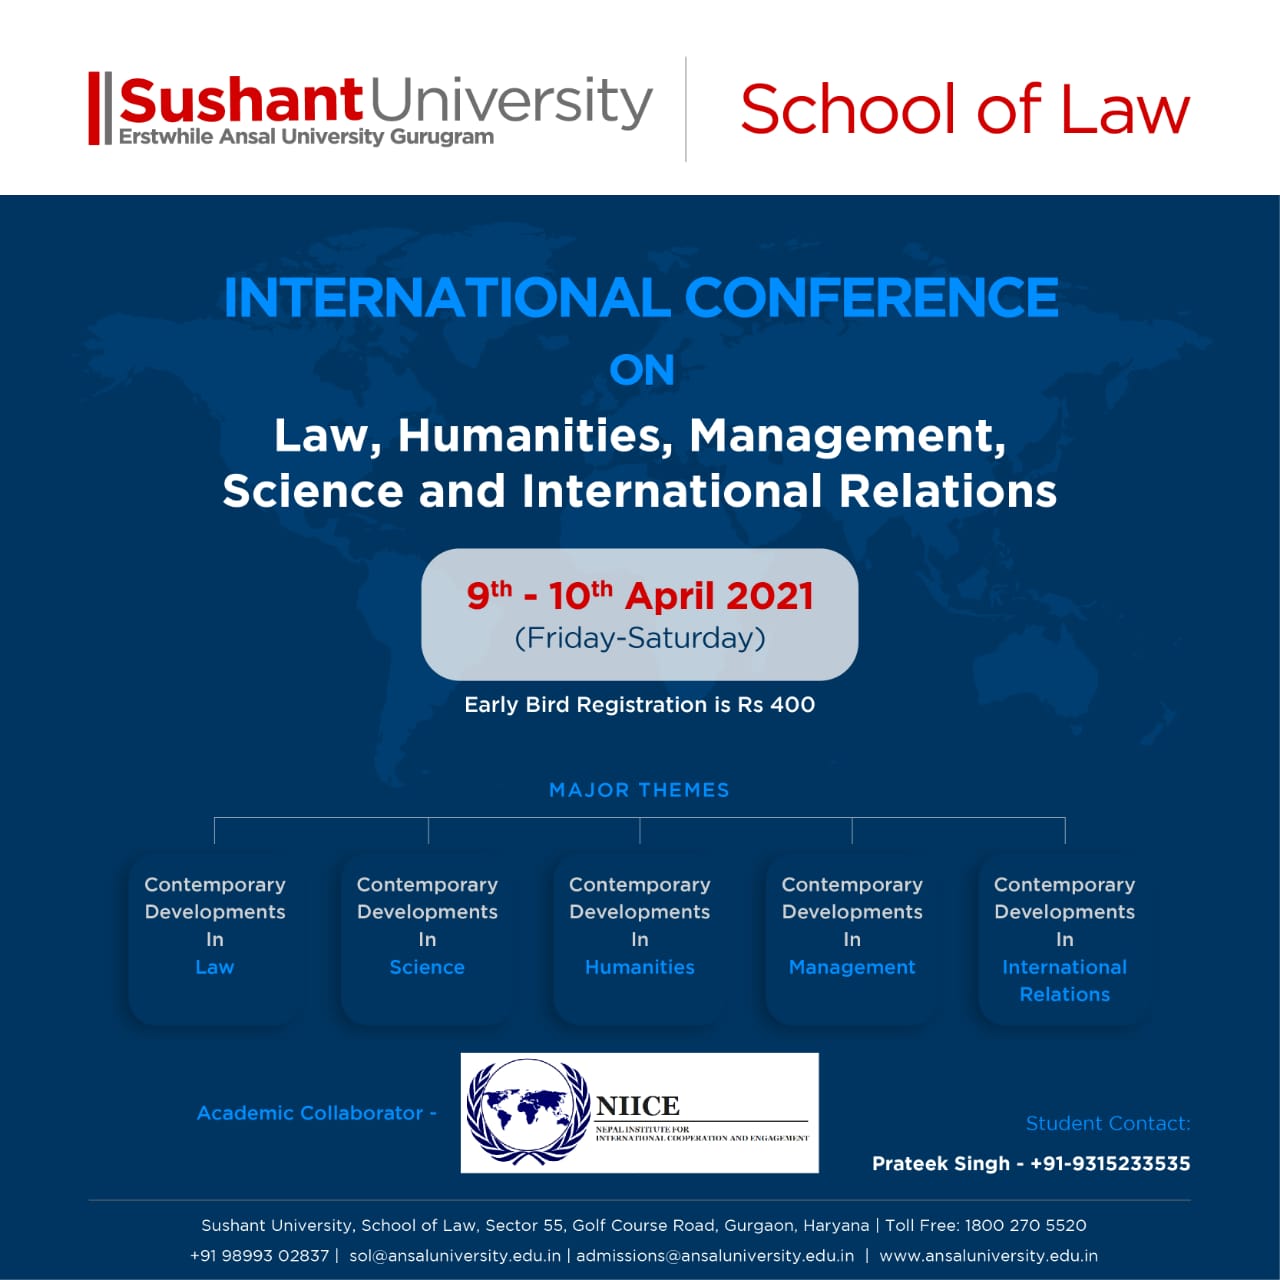 International Conference on Law, Humanities, Management, Science and International Relations